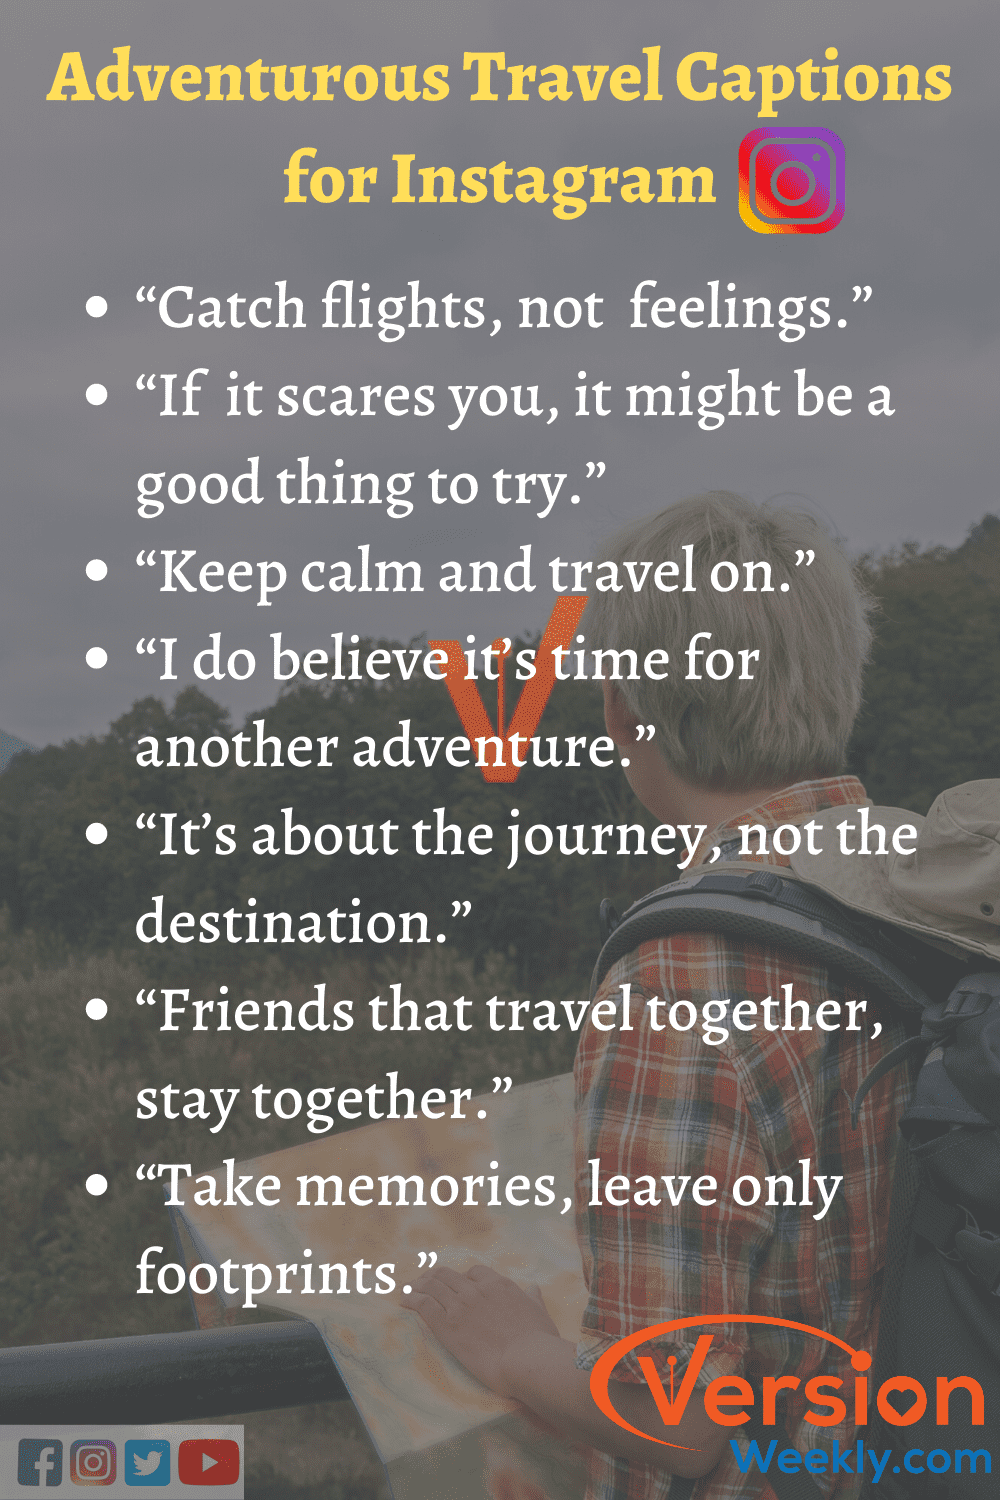 Insta captions for Adventure Traveling